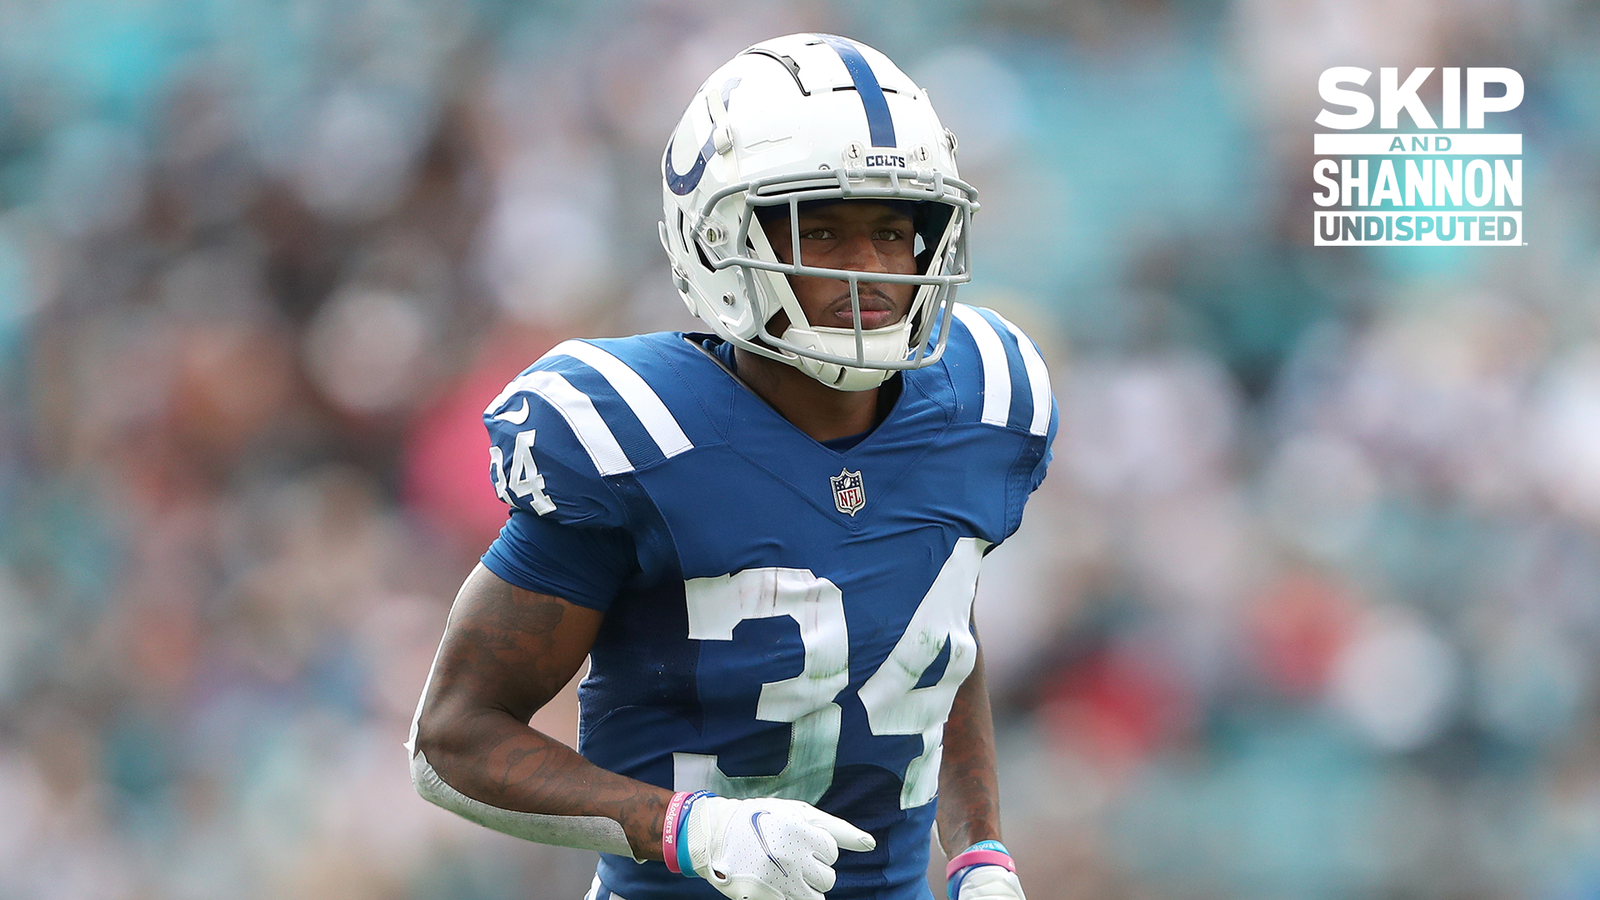 NFL investigating Colts CB Isaiah Rodgers